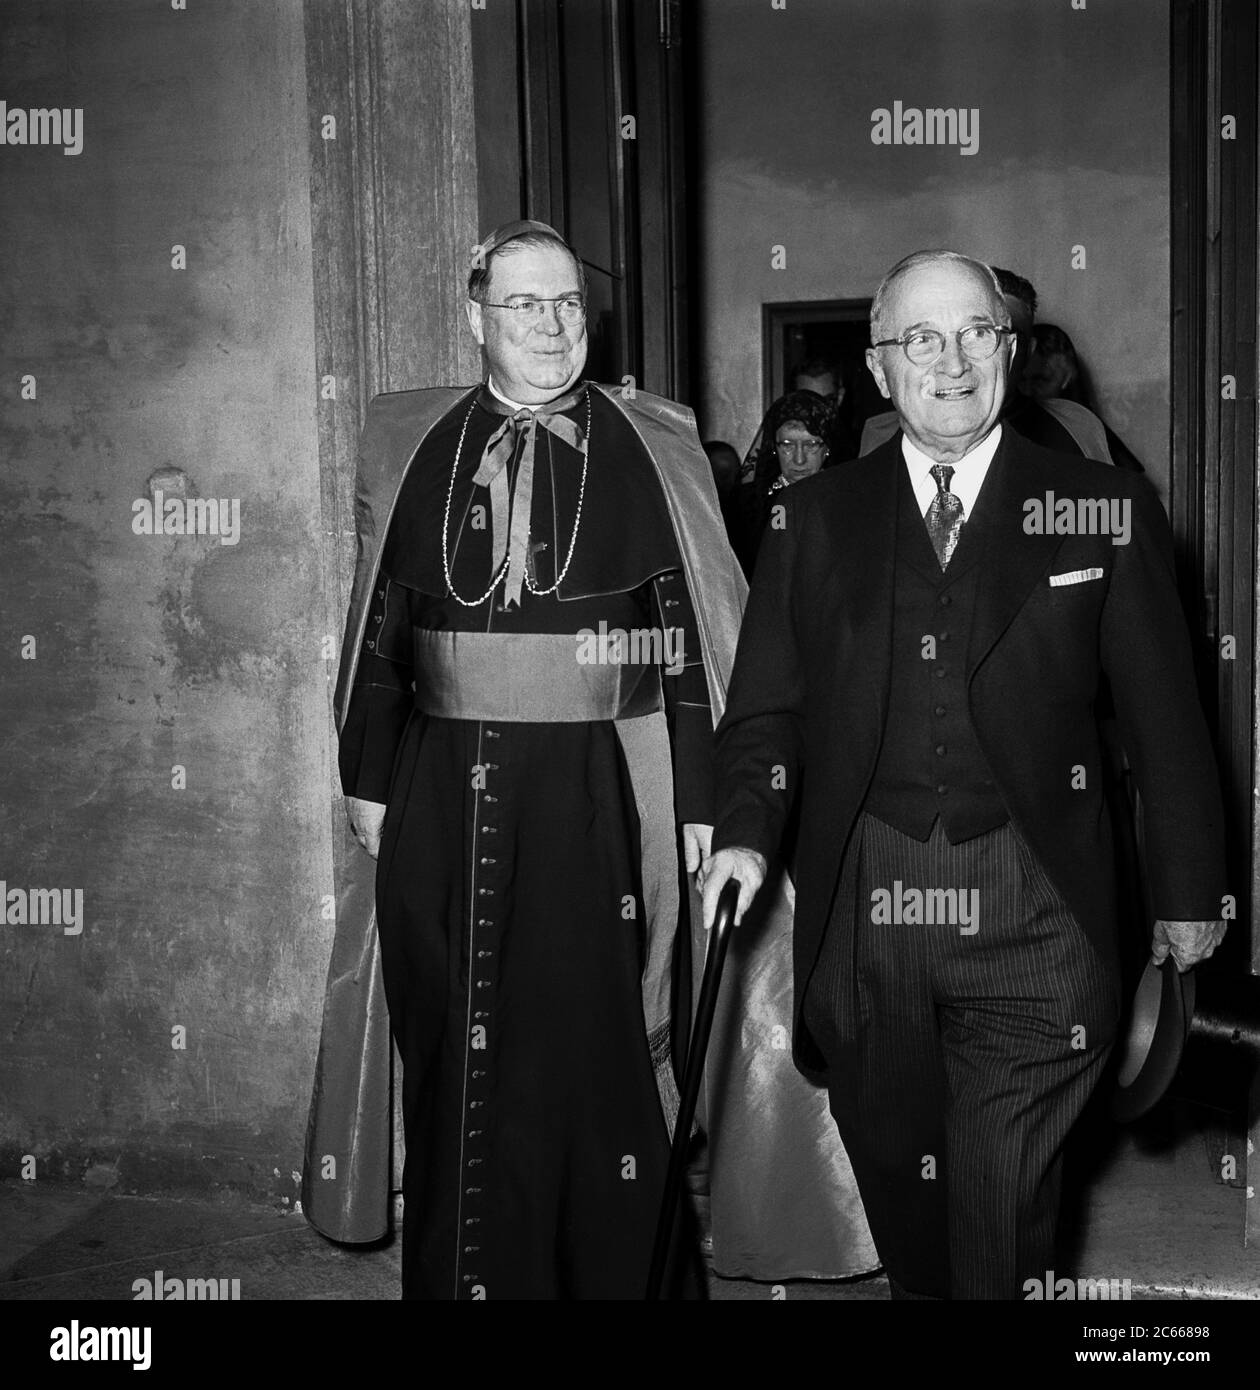 Vatican City - Visit to Pius XII By Truman ex President of Usa 20th May 1956 Stock Photo